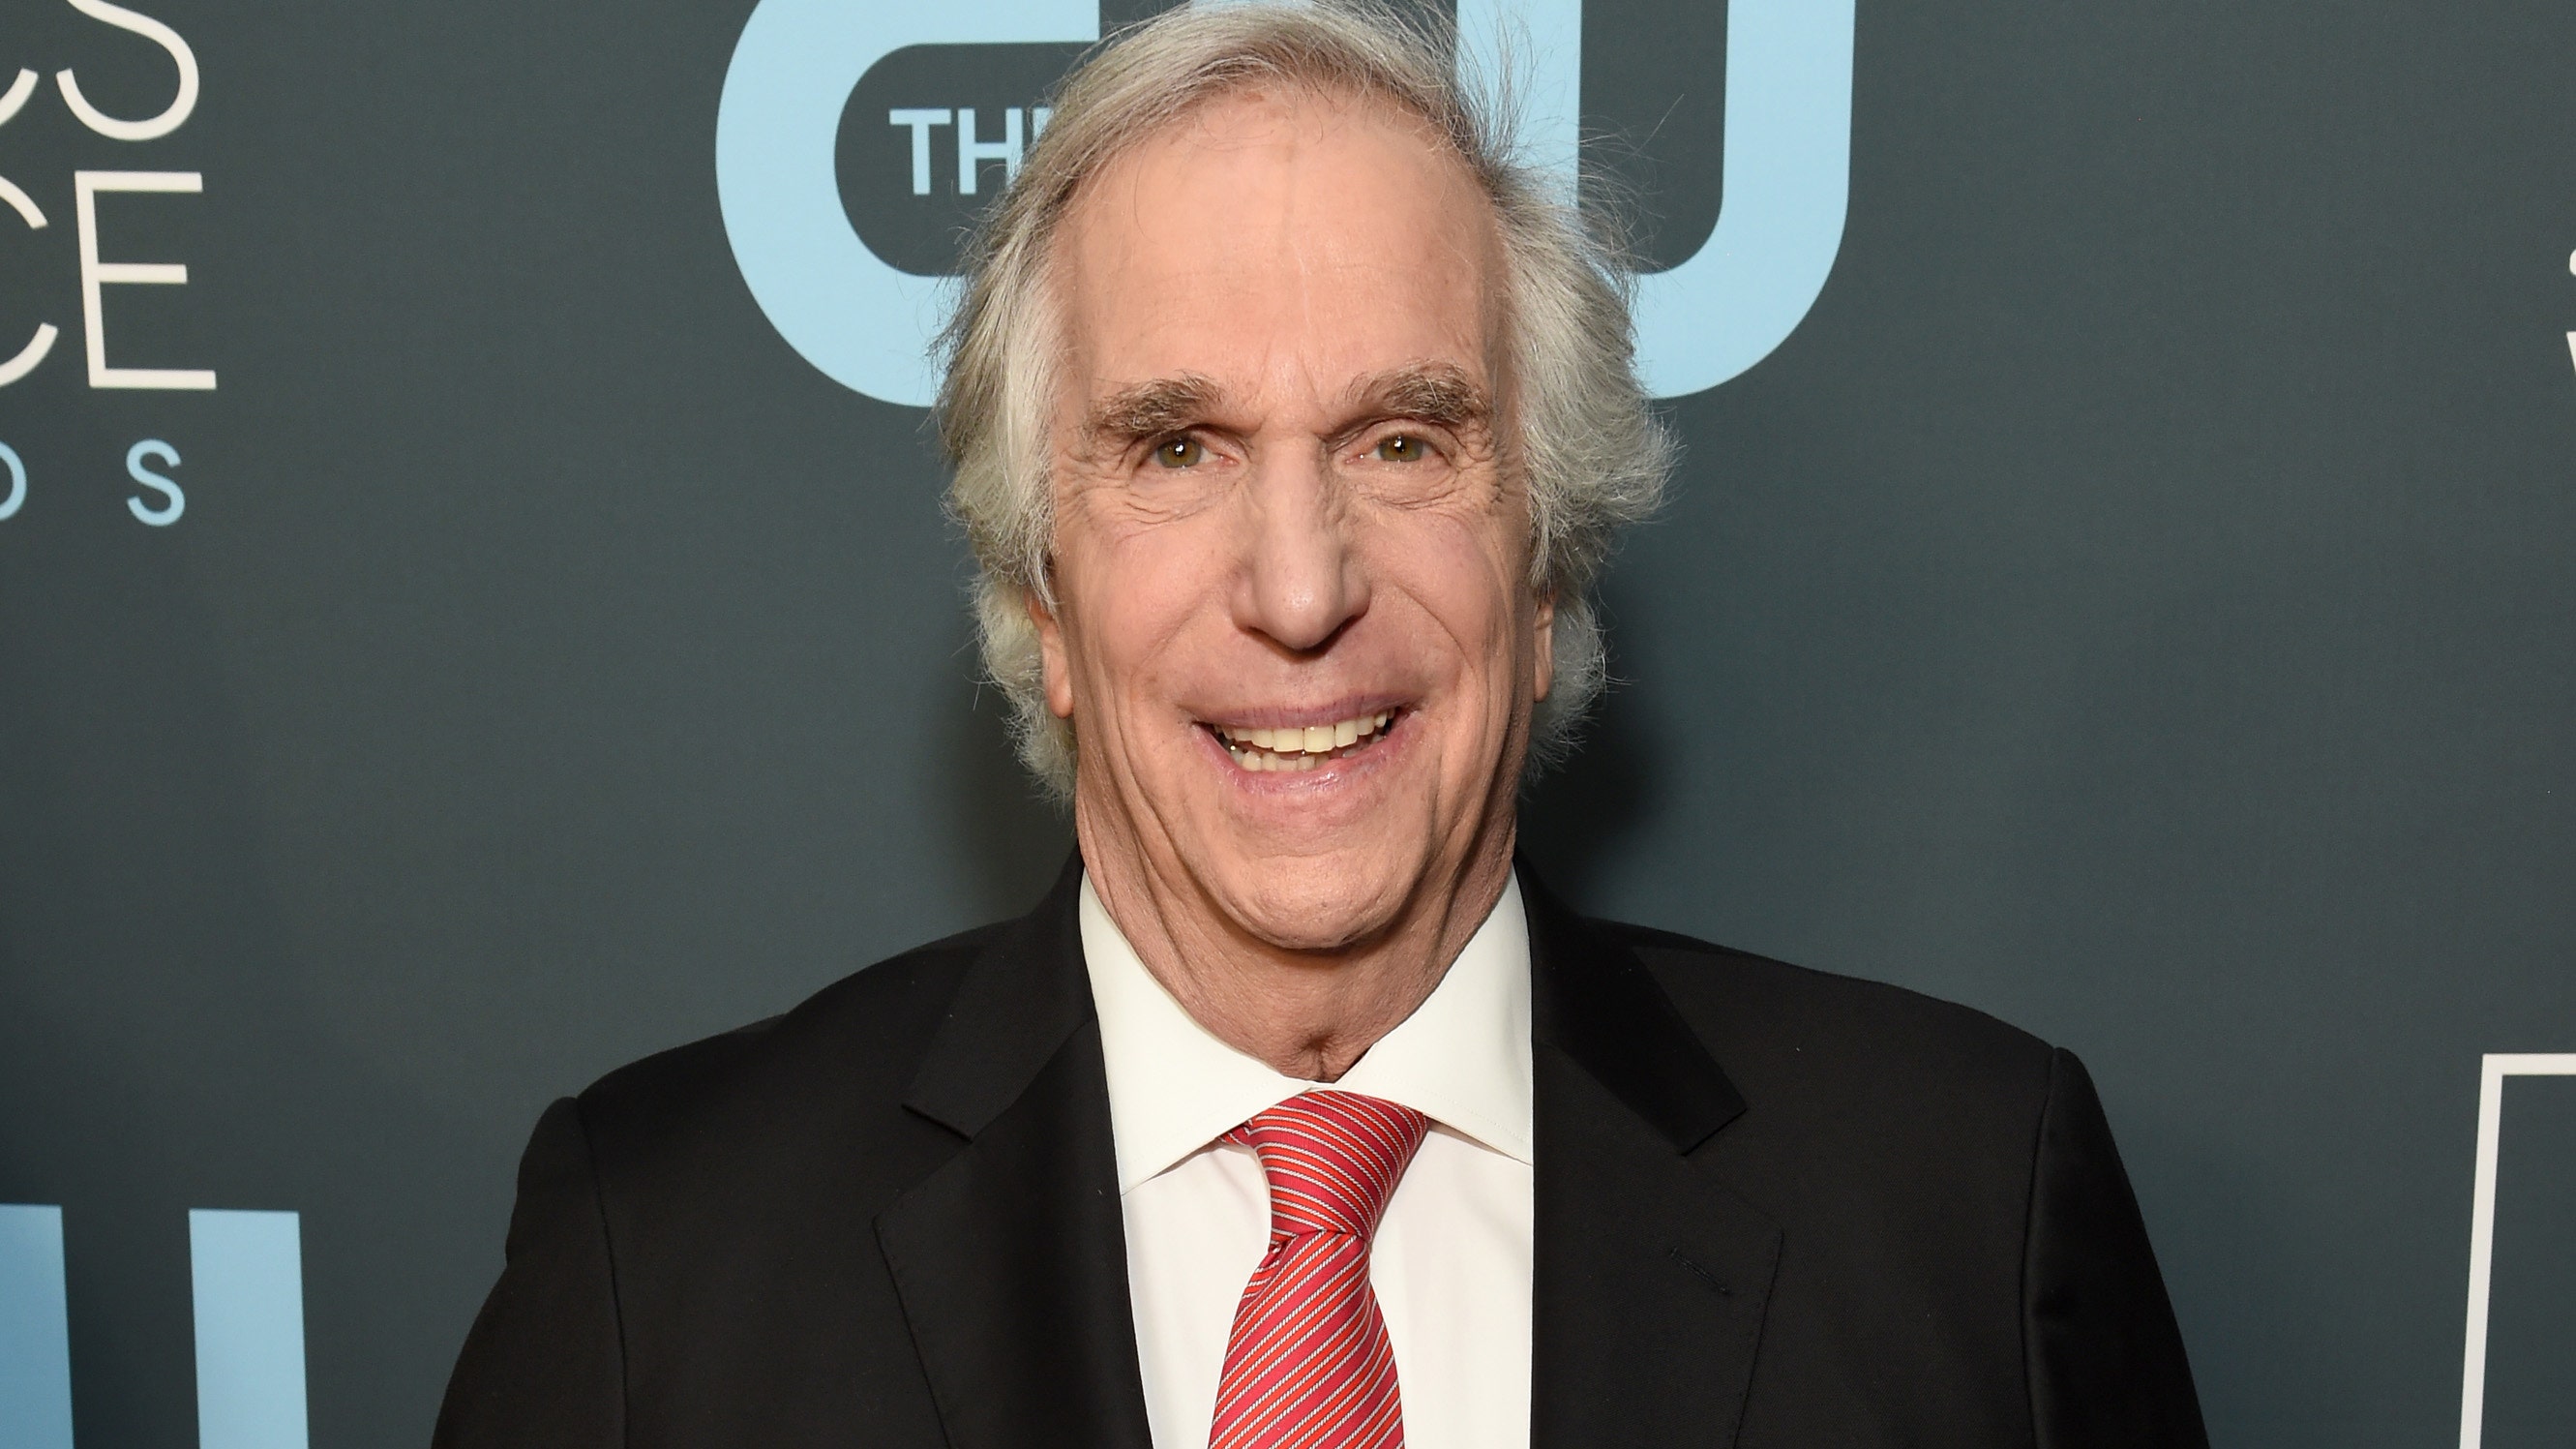 Henry Winkler hears back after tweeting ‘only a cataclysmic Event’ can bring US together